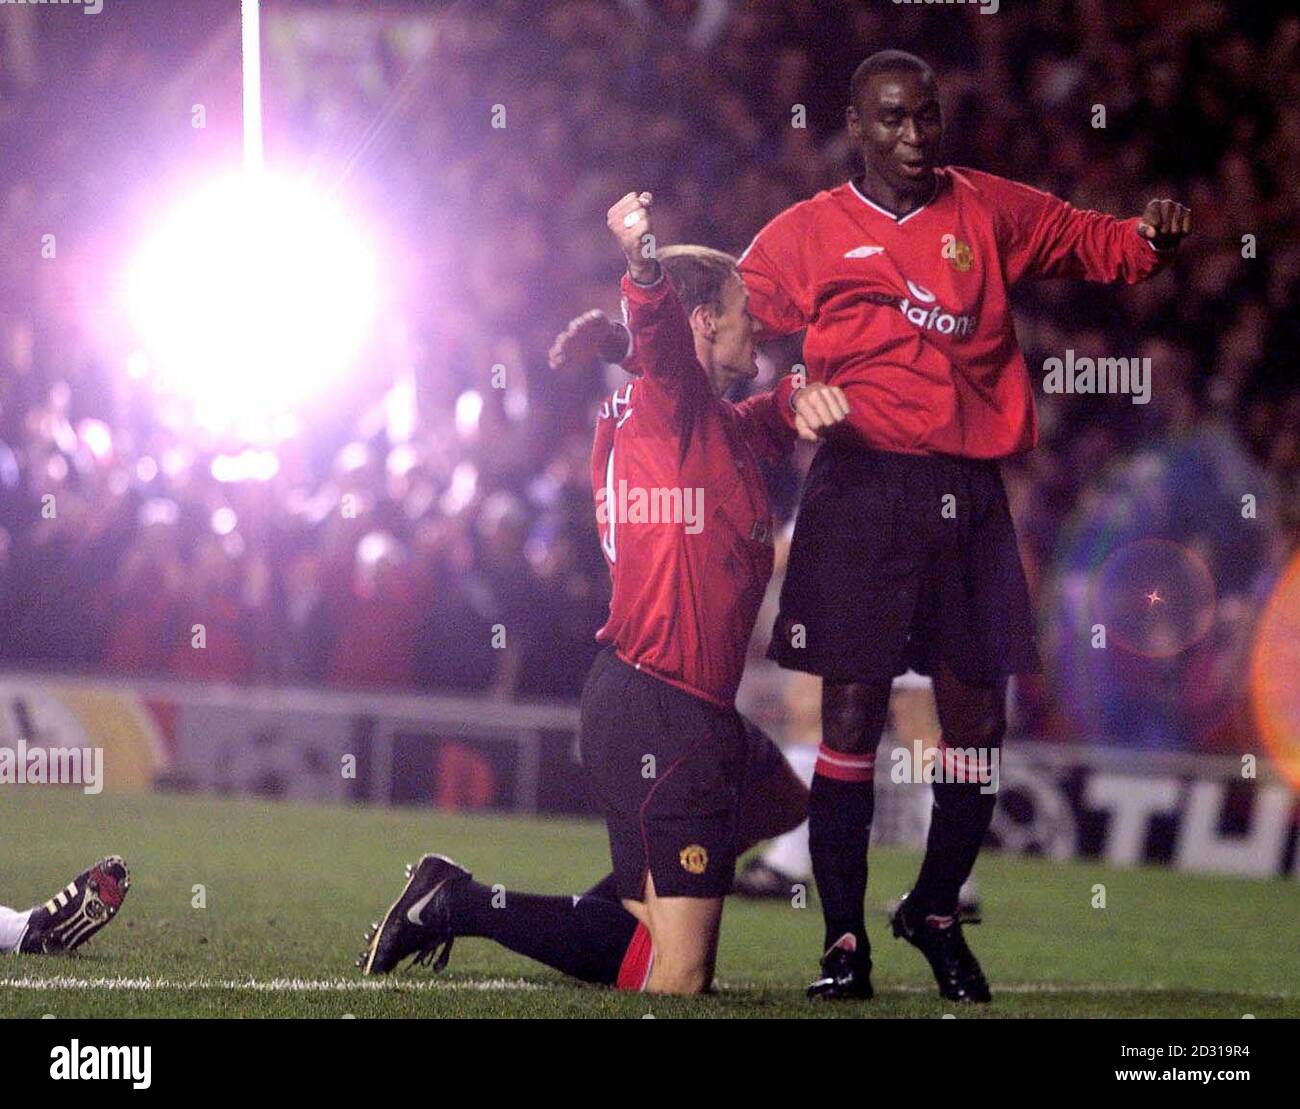 A glow of light for Manchester United's Teddy Sheringham as he celebrates his goal against Dynamo Kiev at Old Trafford during their Champions League match. Stock Photo